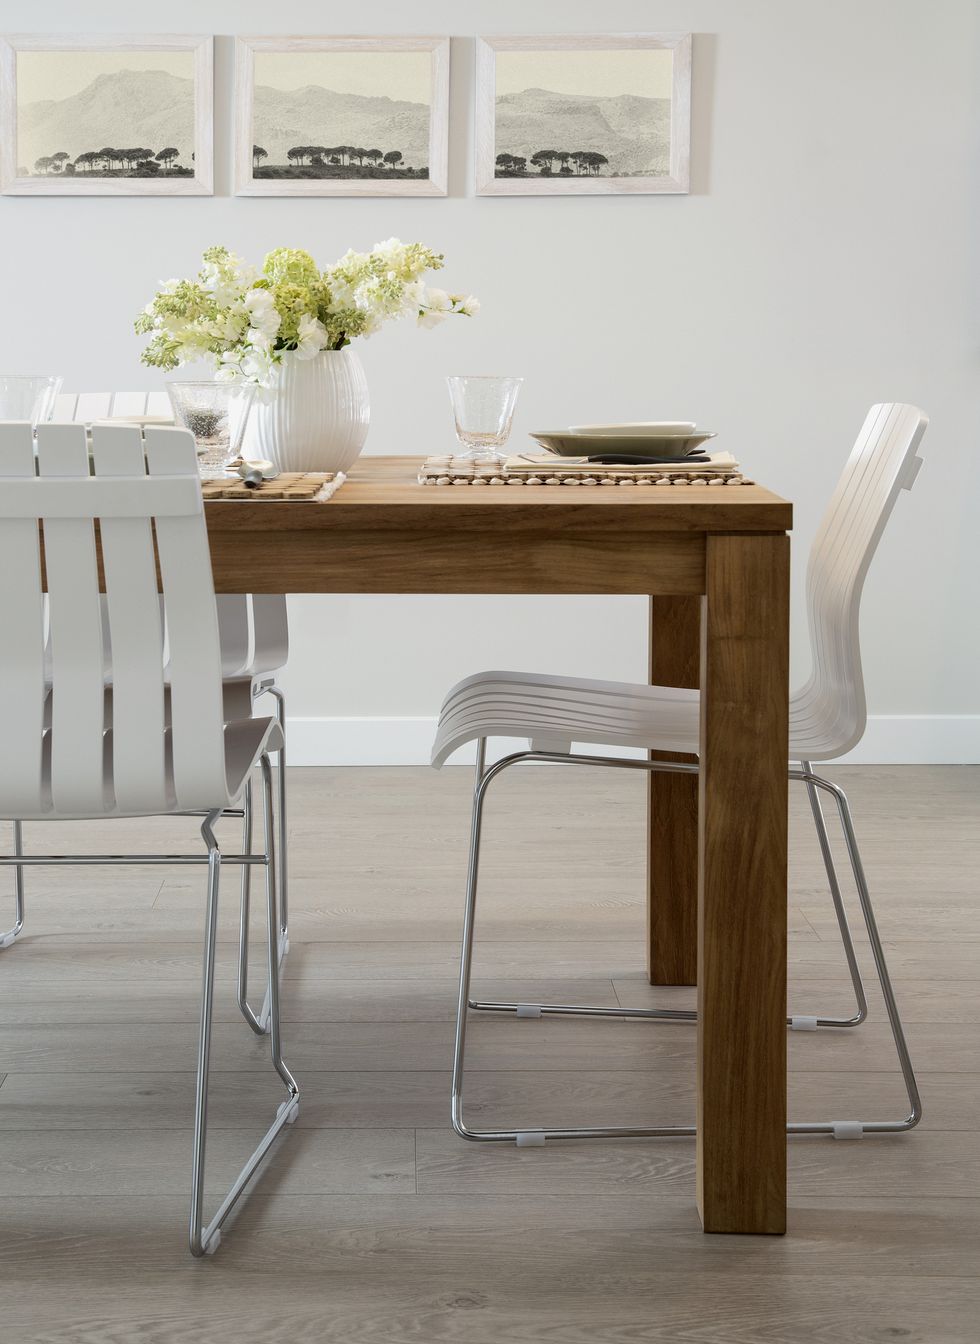 White chairs at wooden dining table